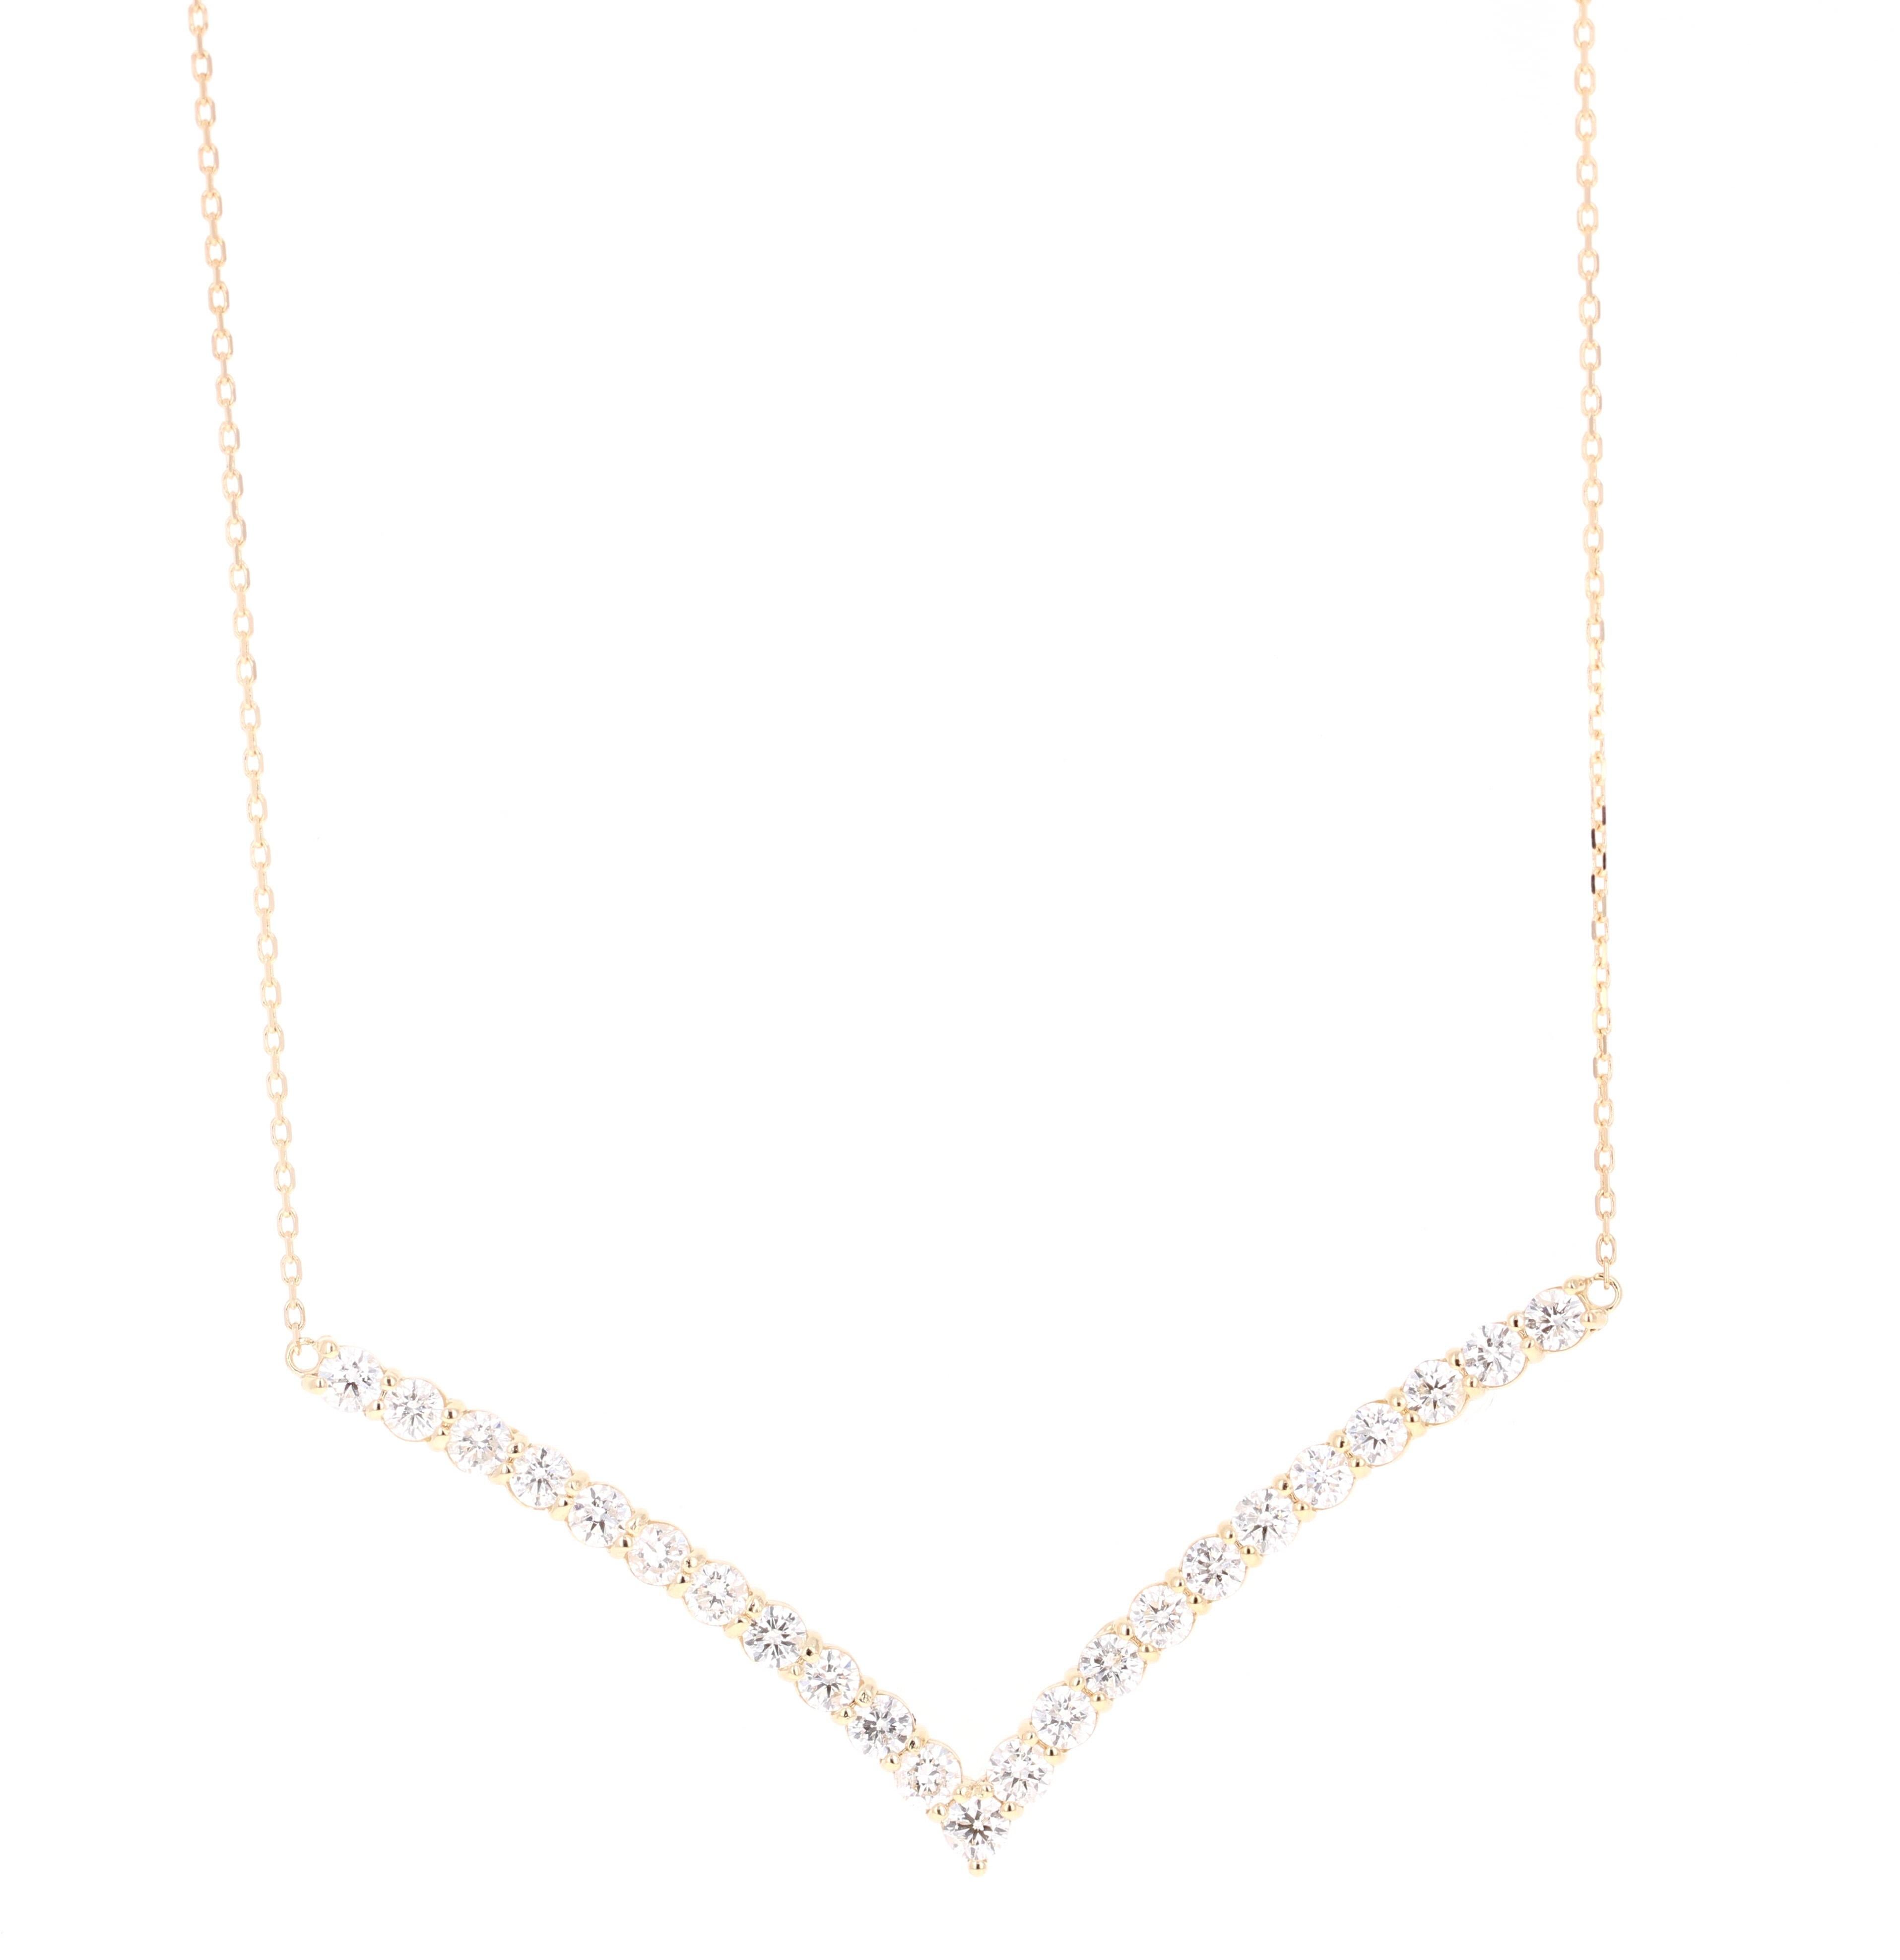 This Chain Necklace has a V-Shaped Necklace that has 23 Round Cut Diamonds (Clarity: SI, Color: F) that weigh 2.09 Carats. 
The total carat weight of the necklace is 2.09 Carats.

It is beautifully curated in 14 Karat Yellow Gold and weighs 3.3